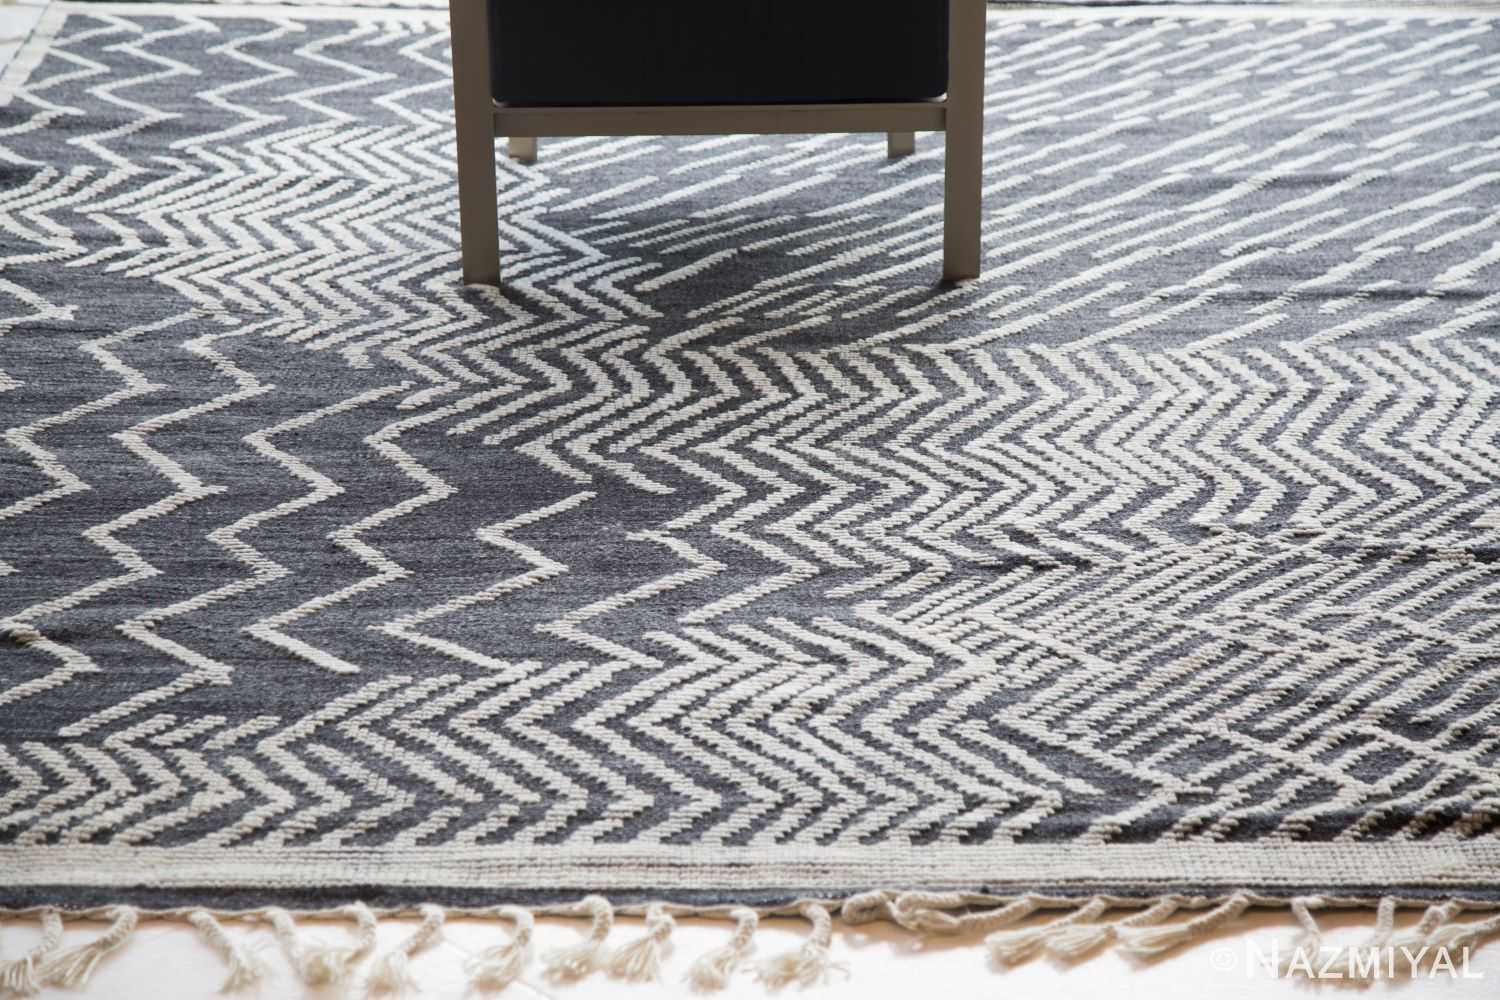 Edge Of Modernist Collection Rug 172786334 by Nazmiyal NYC